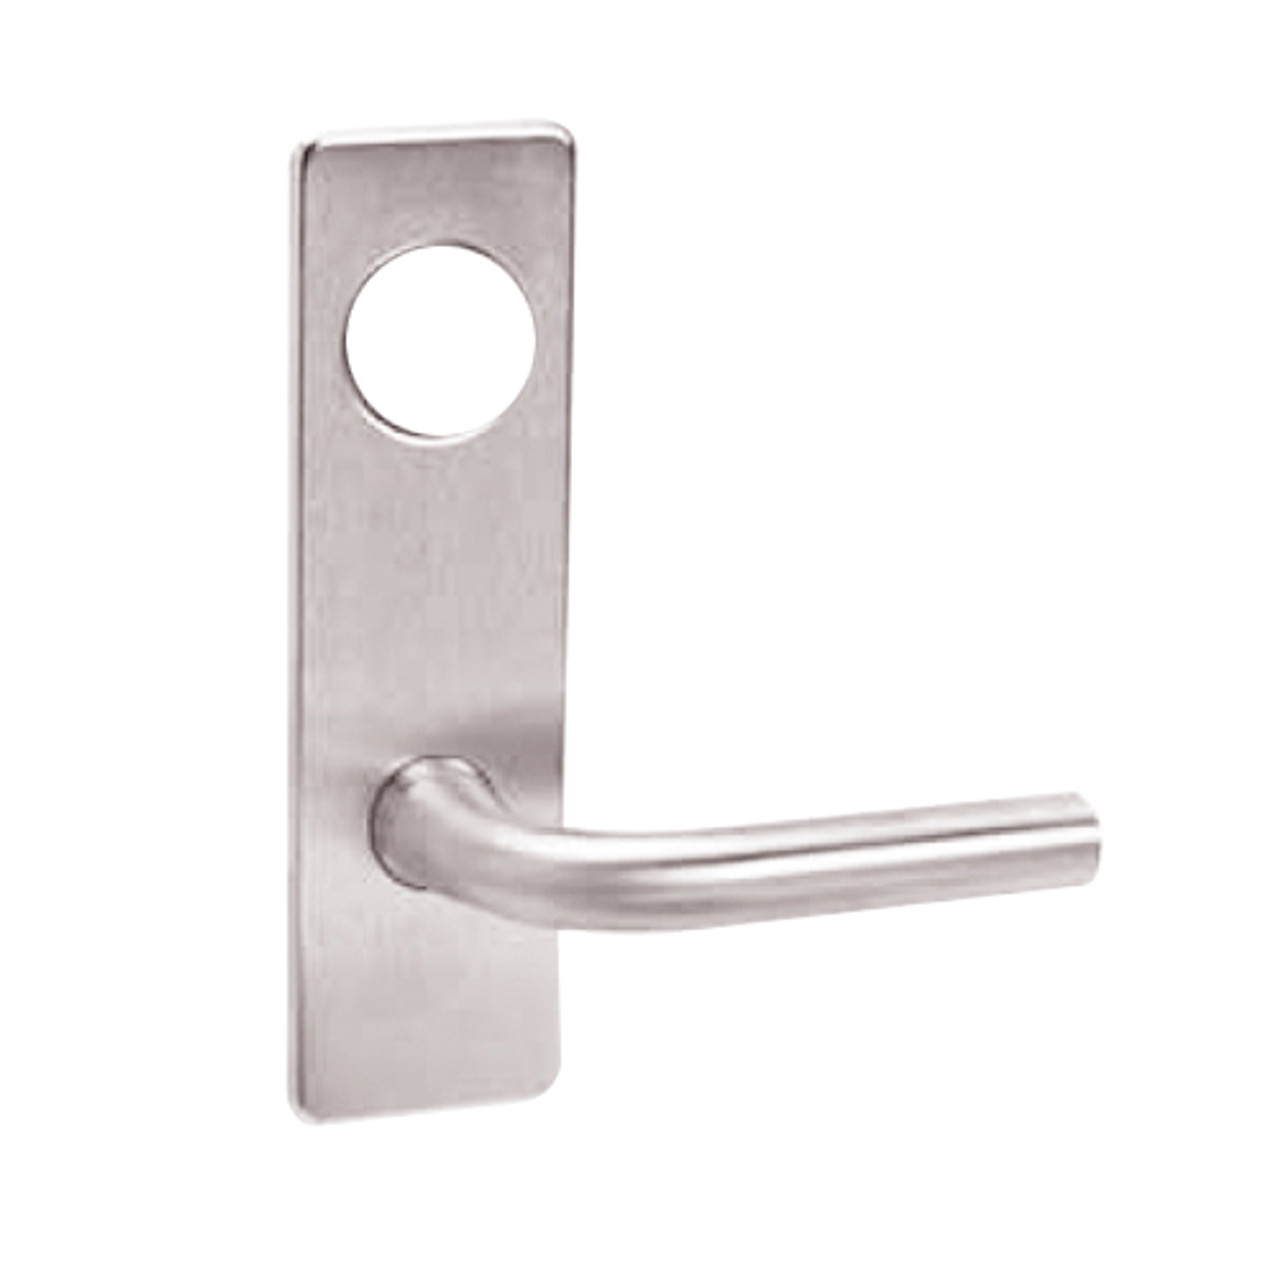 ML2042-RWN-629-CL6 Corbin Russwin ML2000 Series IC 6-Pin Less Core Mortise Entrance Locksets with Regis Lever in Bright Stainless Steel